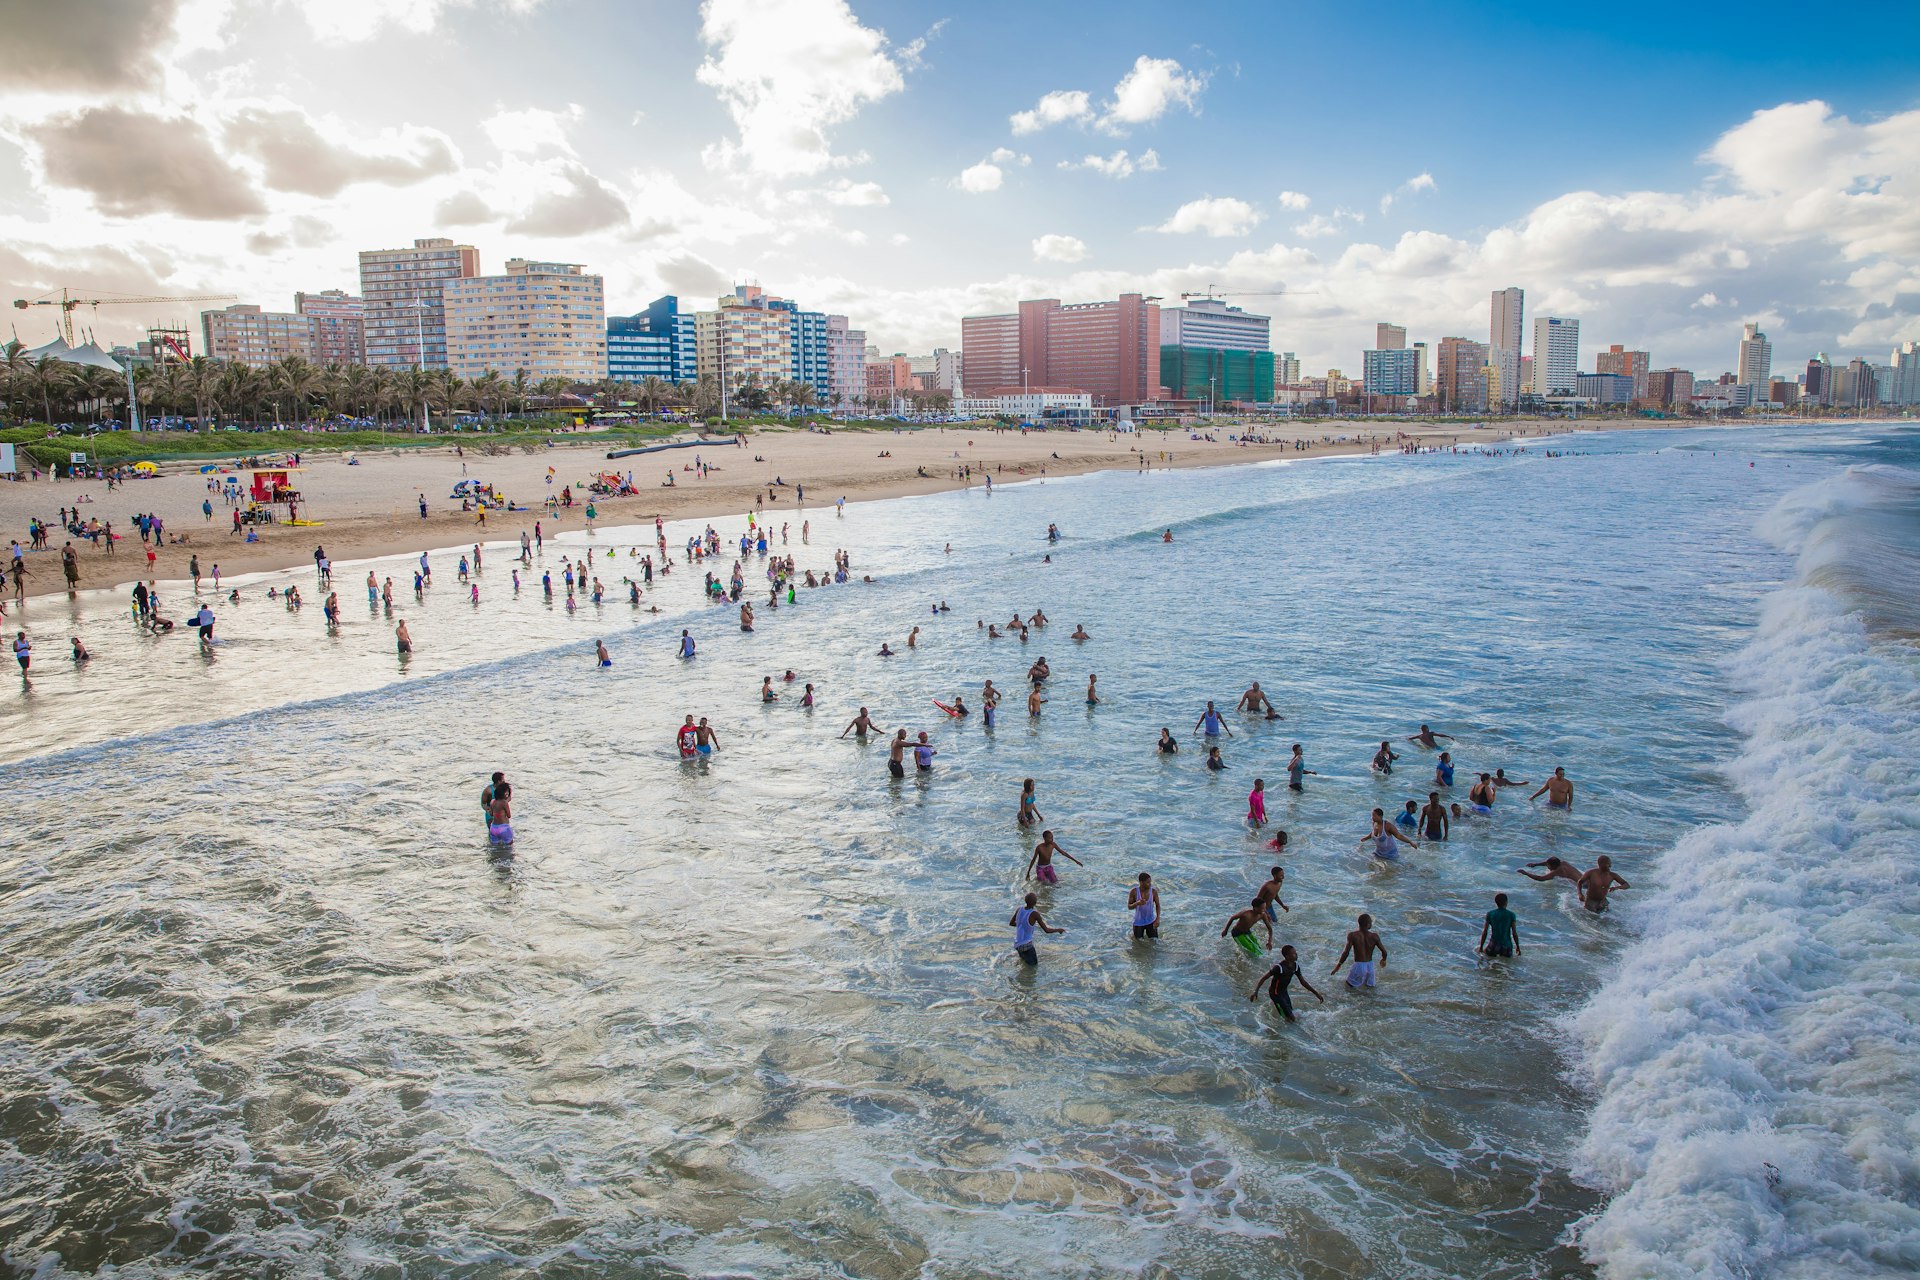 Aerial view of Durban beach where people are playing in the waves